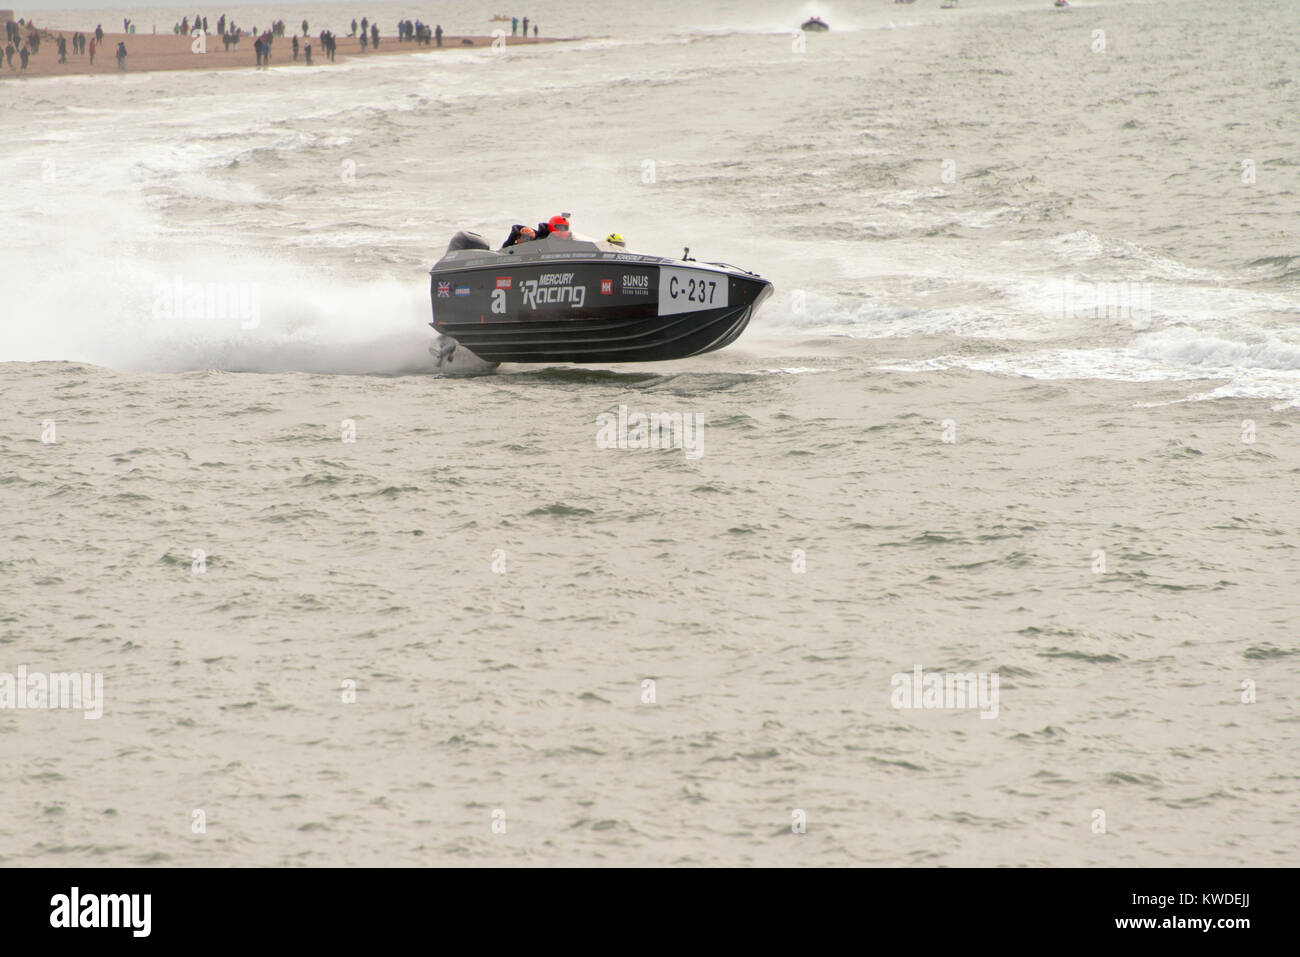 Entrant C-237 in the Exmoouth Power Boat and Ski Club Boxing Day Power Boat Race. Boat skimming water. Stock Photo